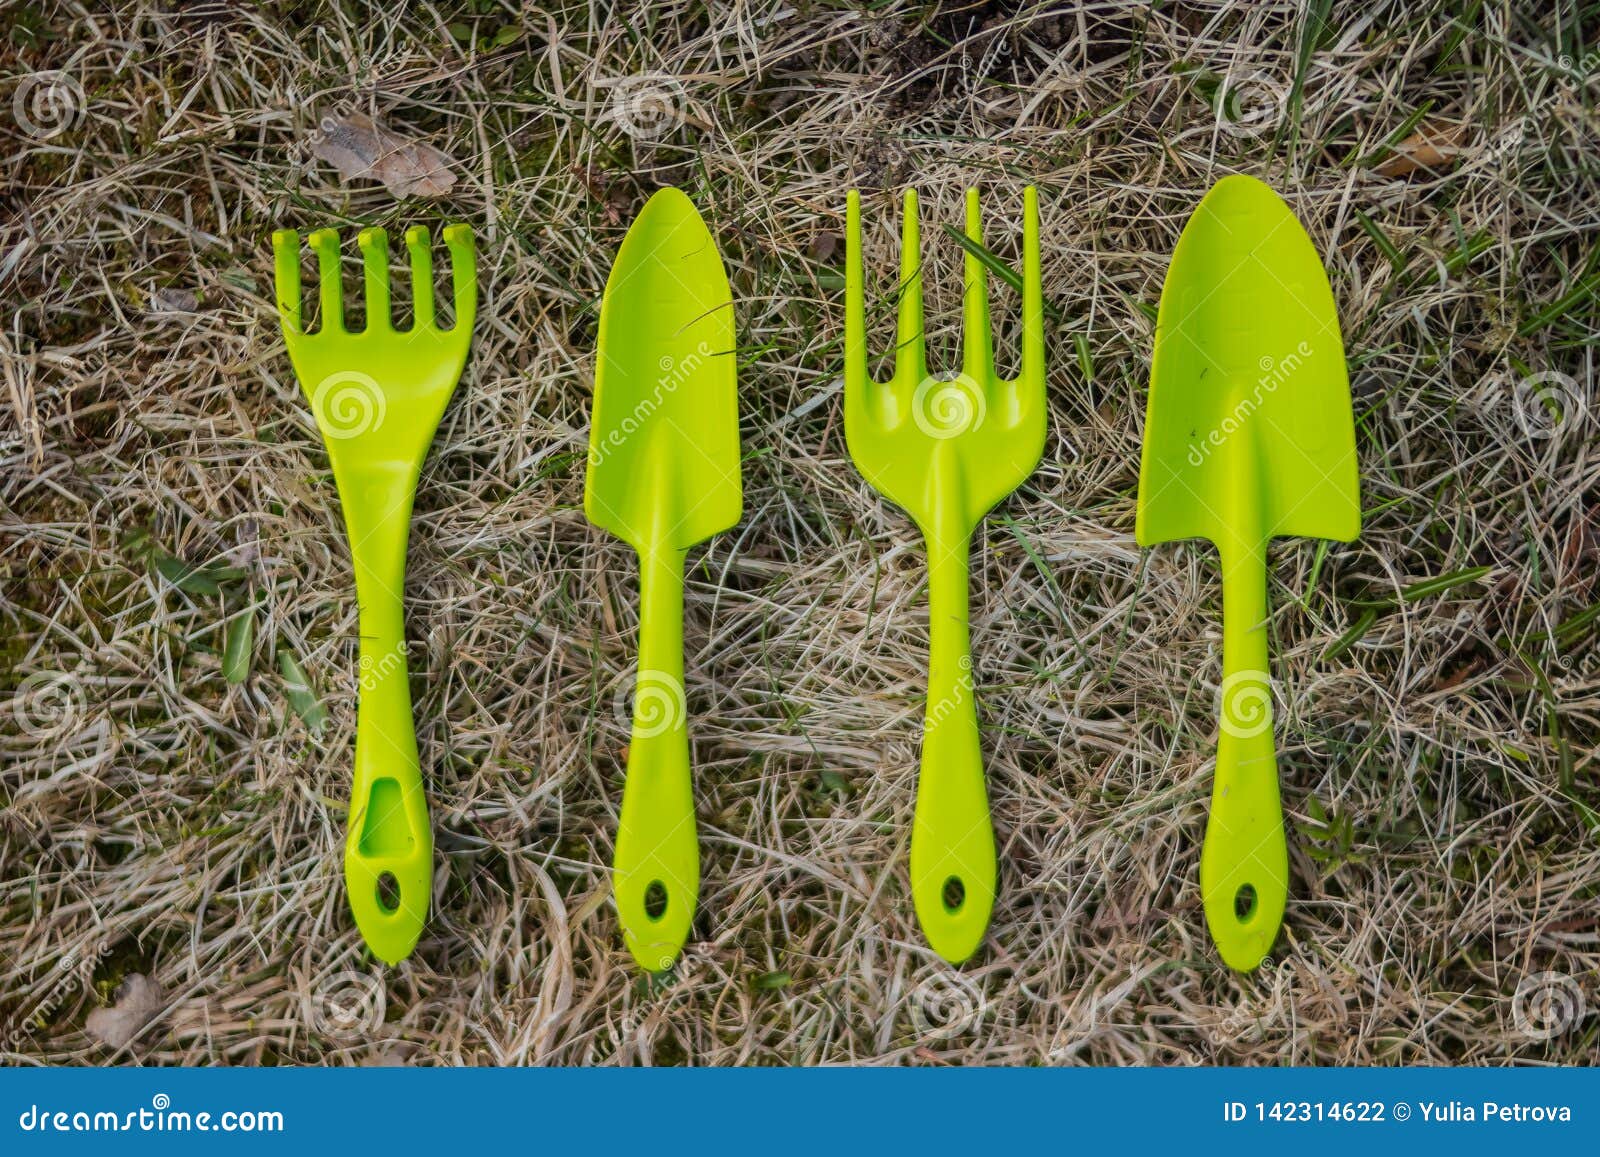 Set of Small Plastic Garden Implements Arranged in a Neat Row on a ...